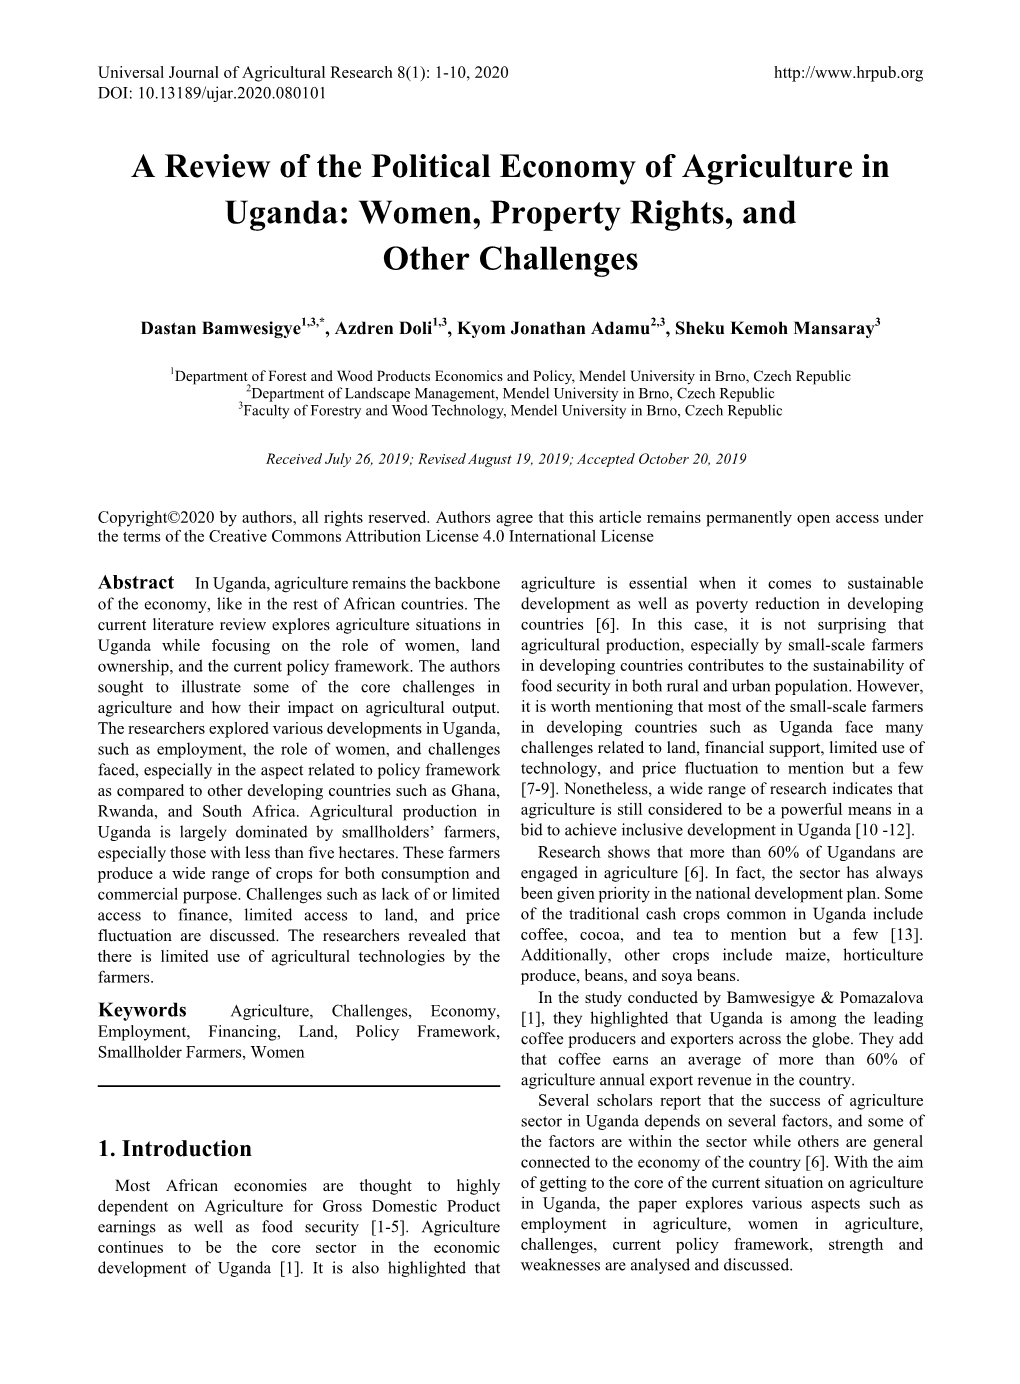 A Review of the Political Economy of Agriculture in Uganda: Women, Property Rights, and Other Challenges